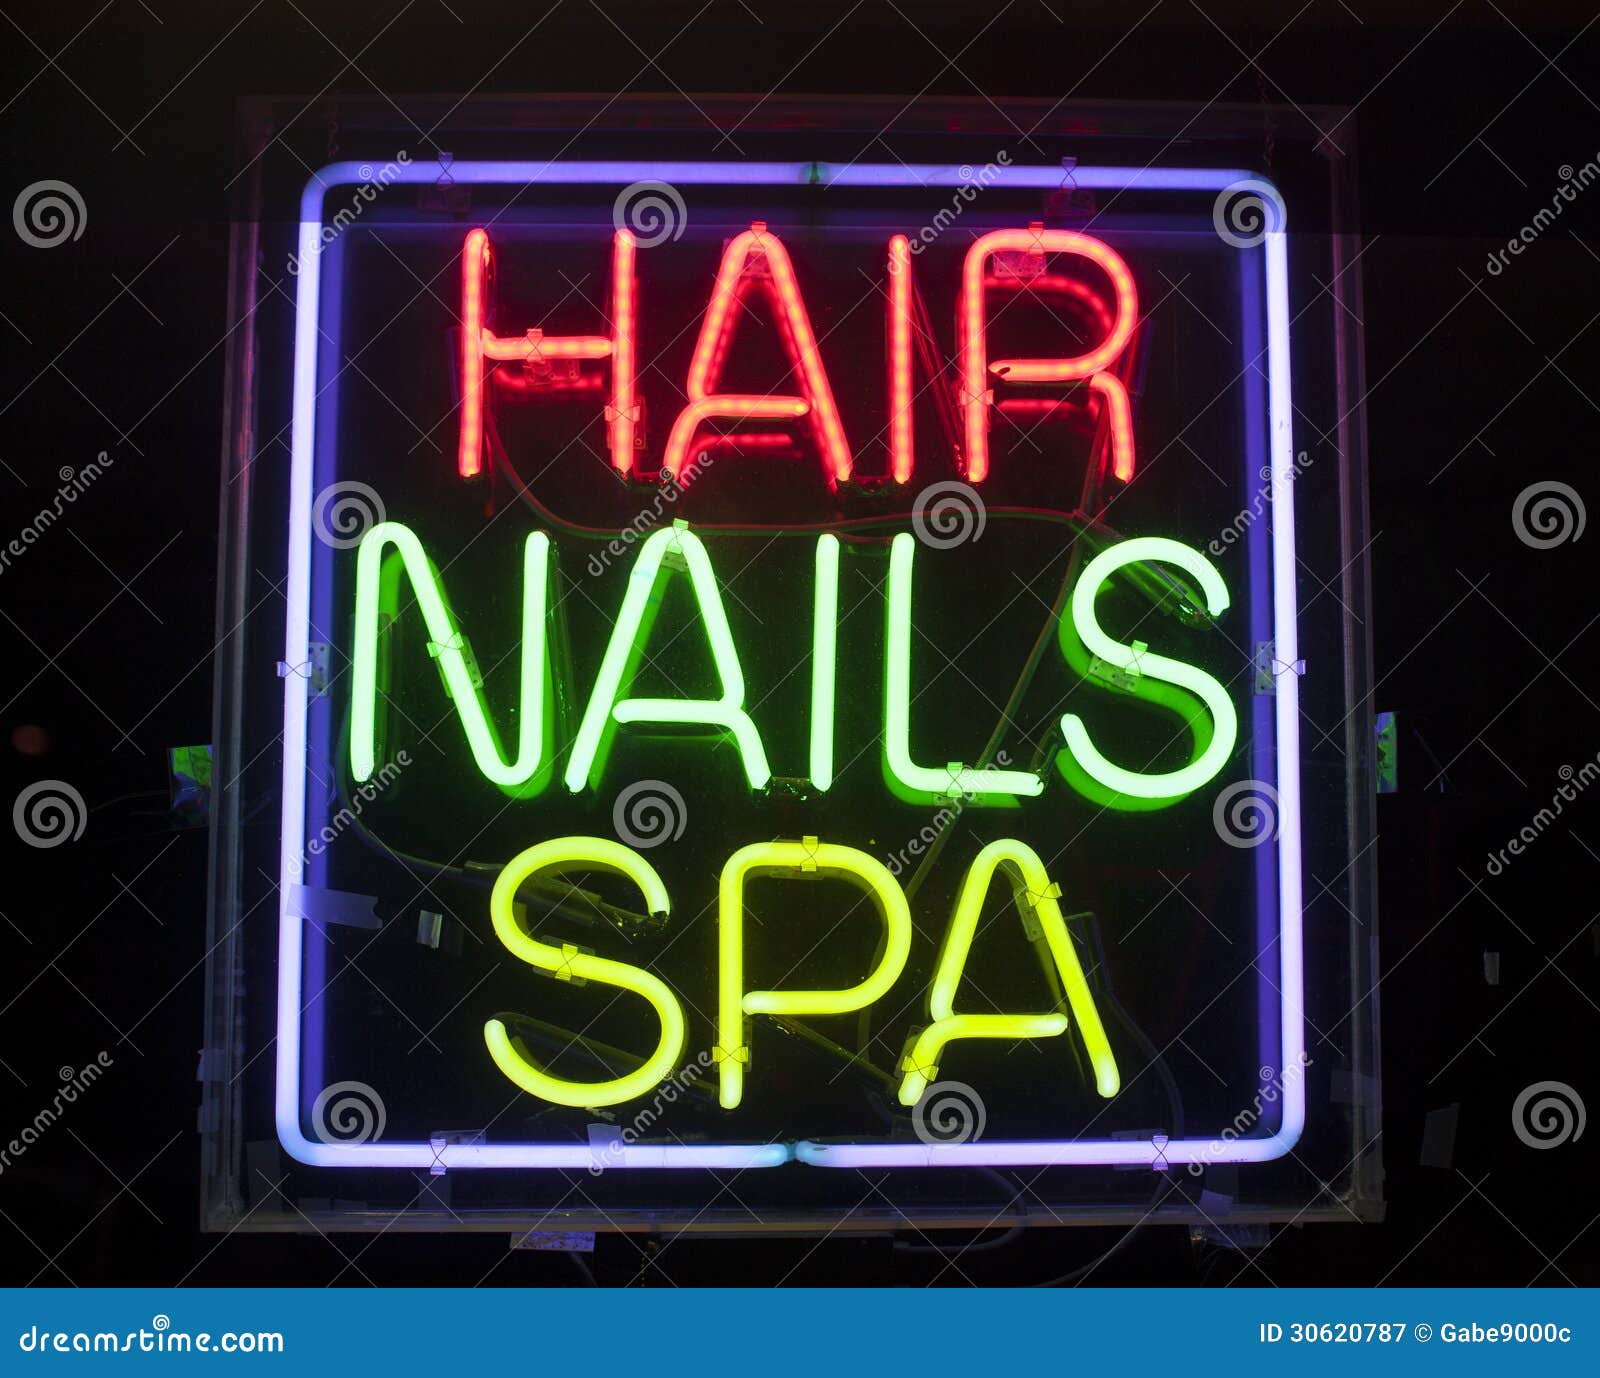 Hair,nails and Spa Neon Sign Stock Image - Image of advertising ...